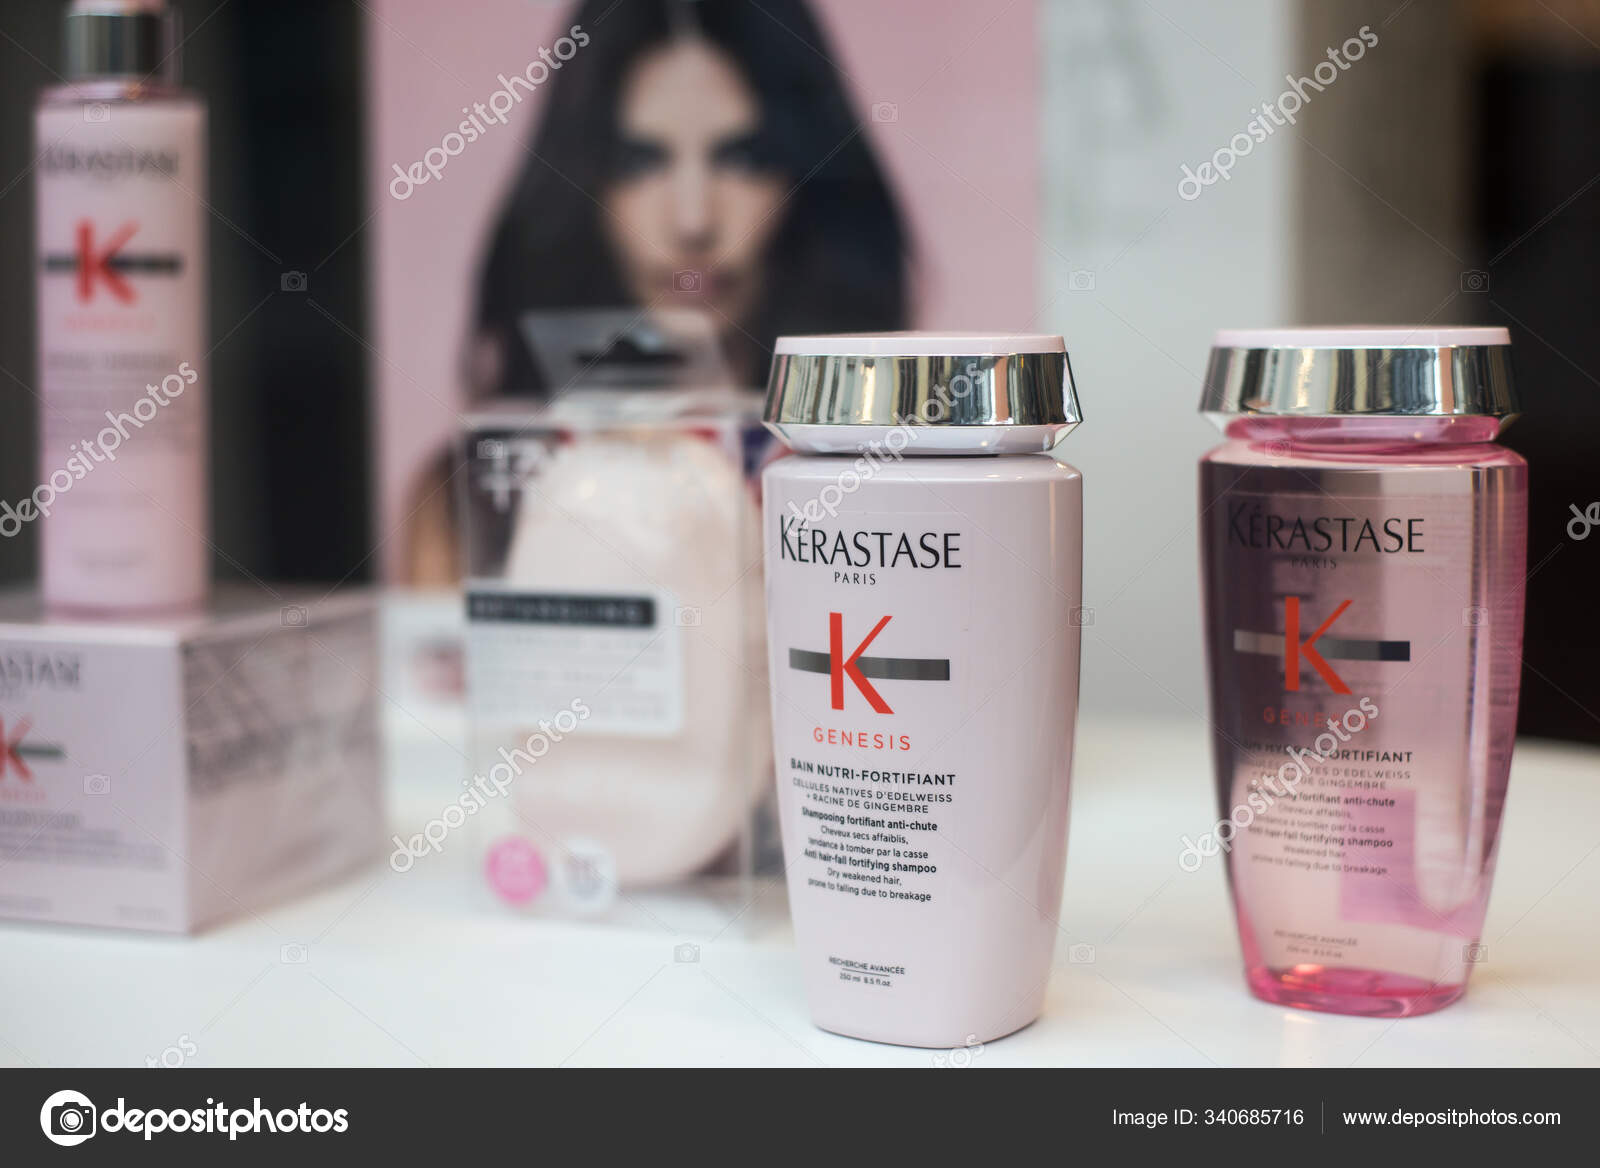 Pink shampoo and lotion bottles by Kerastase brand in a hairdresser store showroom – Stock Editorial Photo NeydtStock #340685716